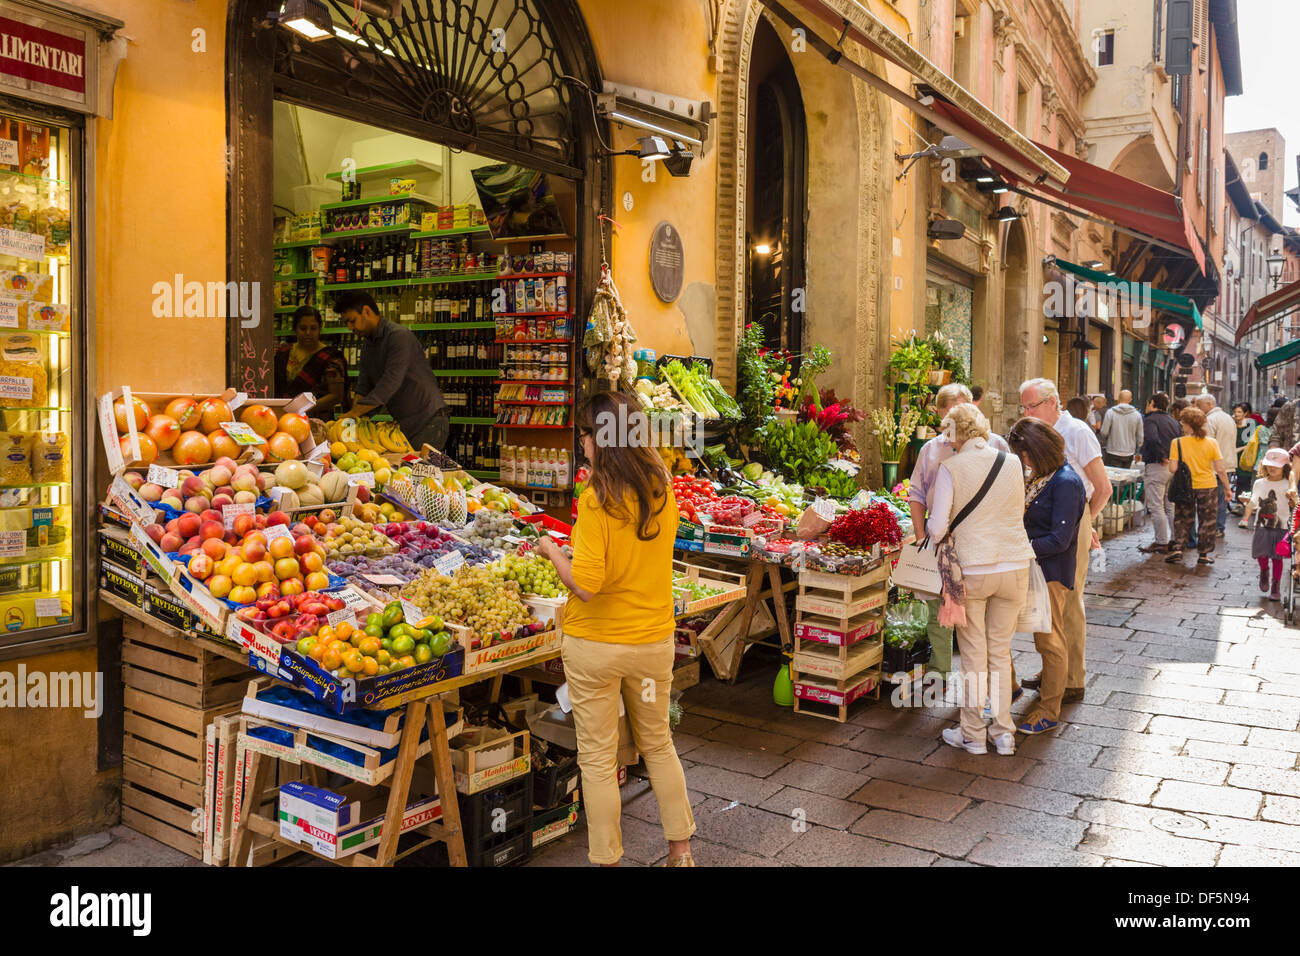 Fruit and vegetables outside a shop on Via Drapperie in the historic city centre, Bologna, Emilia Romagna, Italy Stock Photo